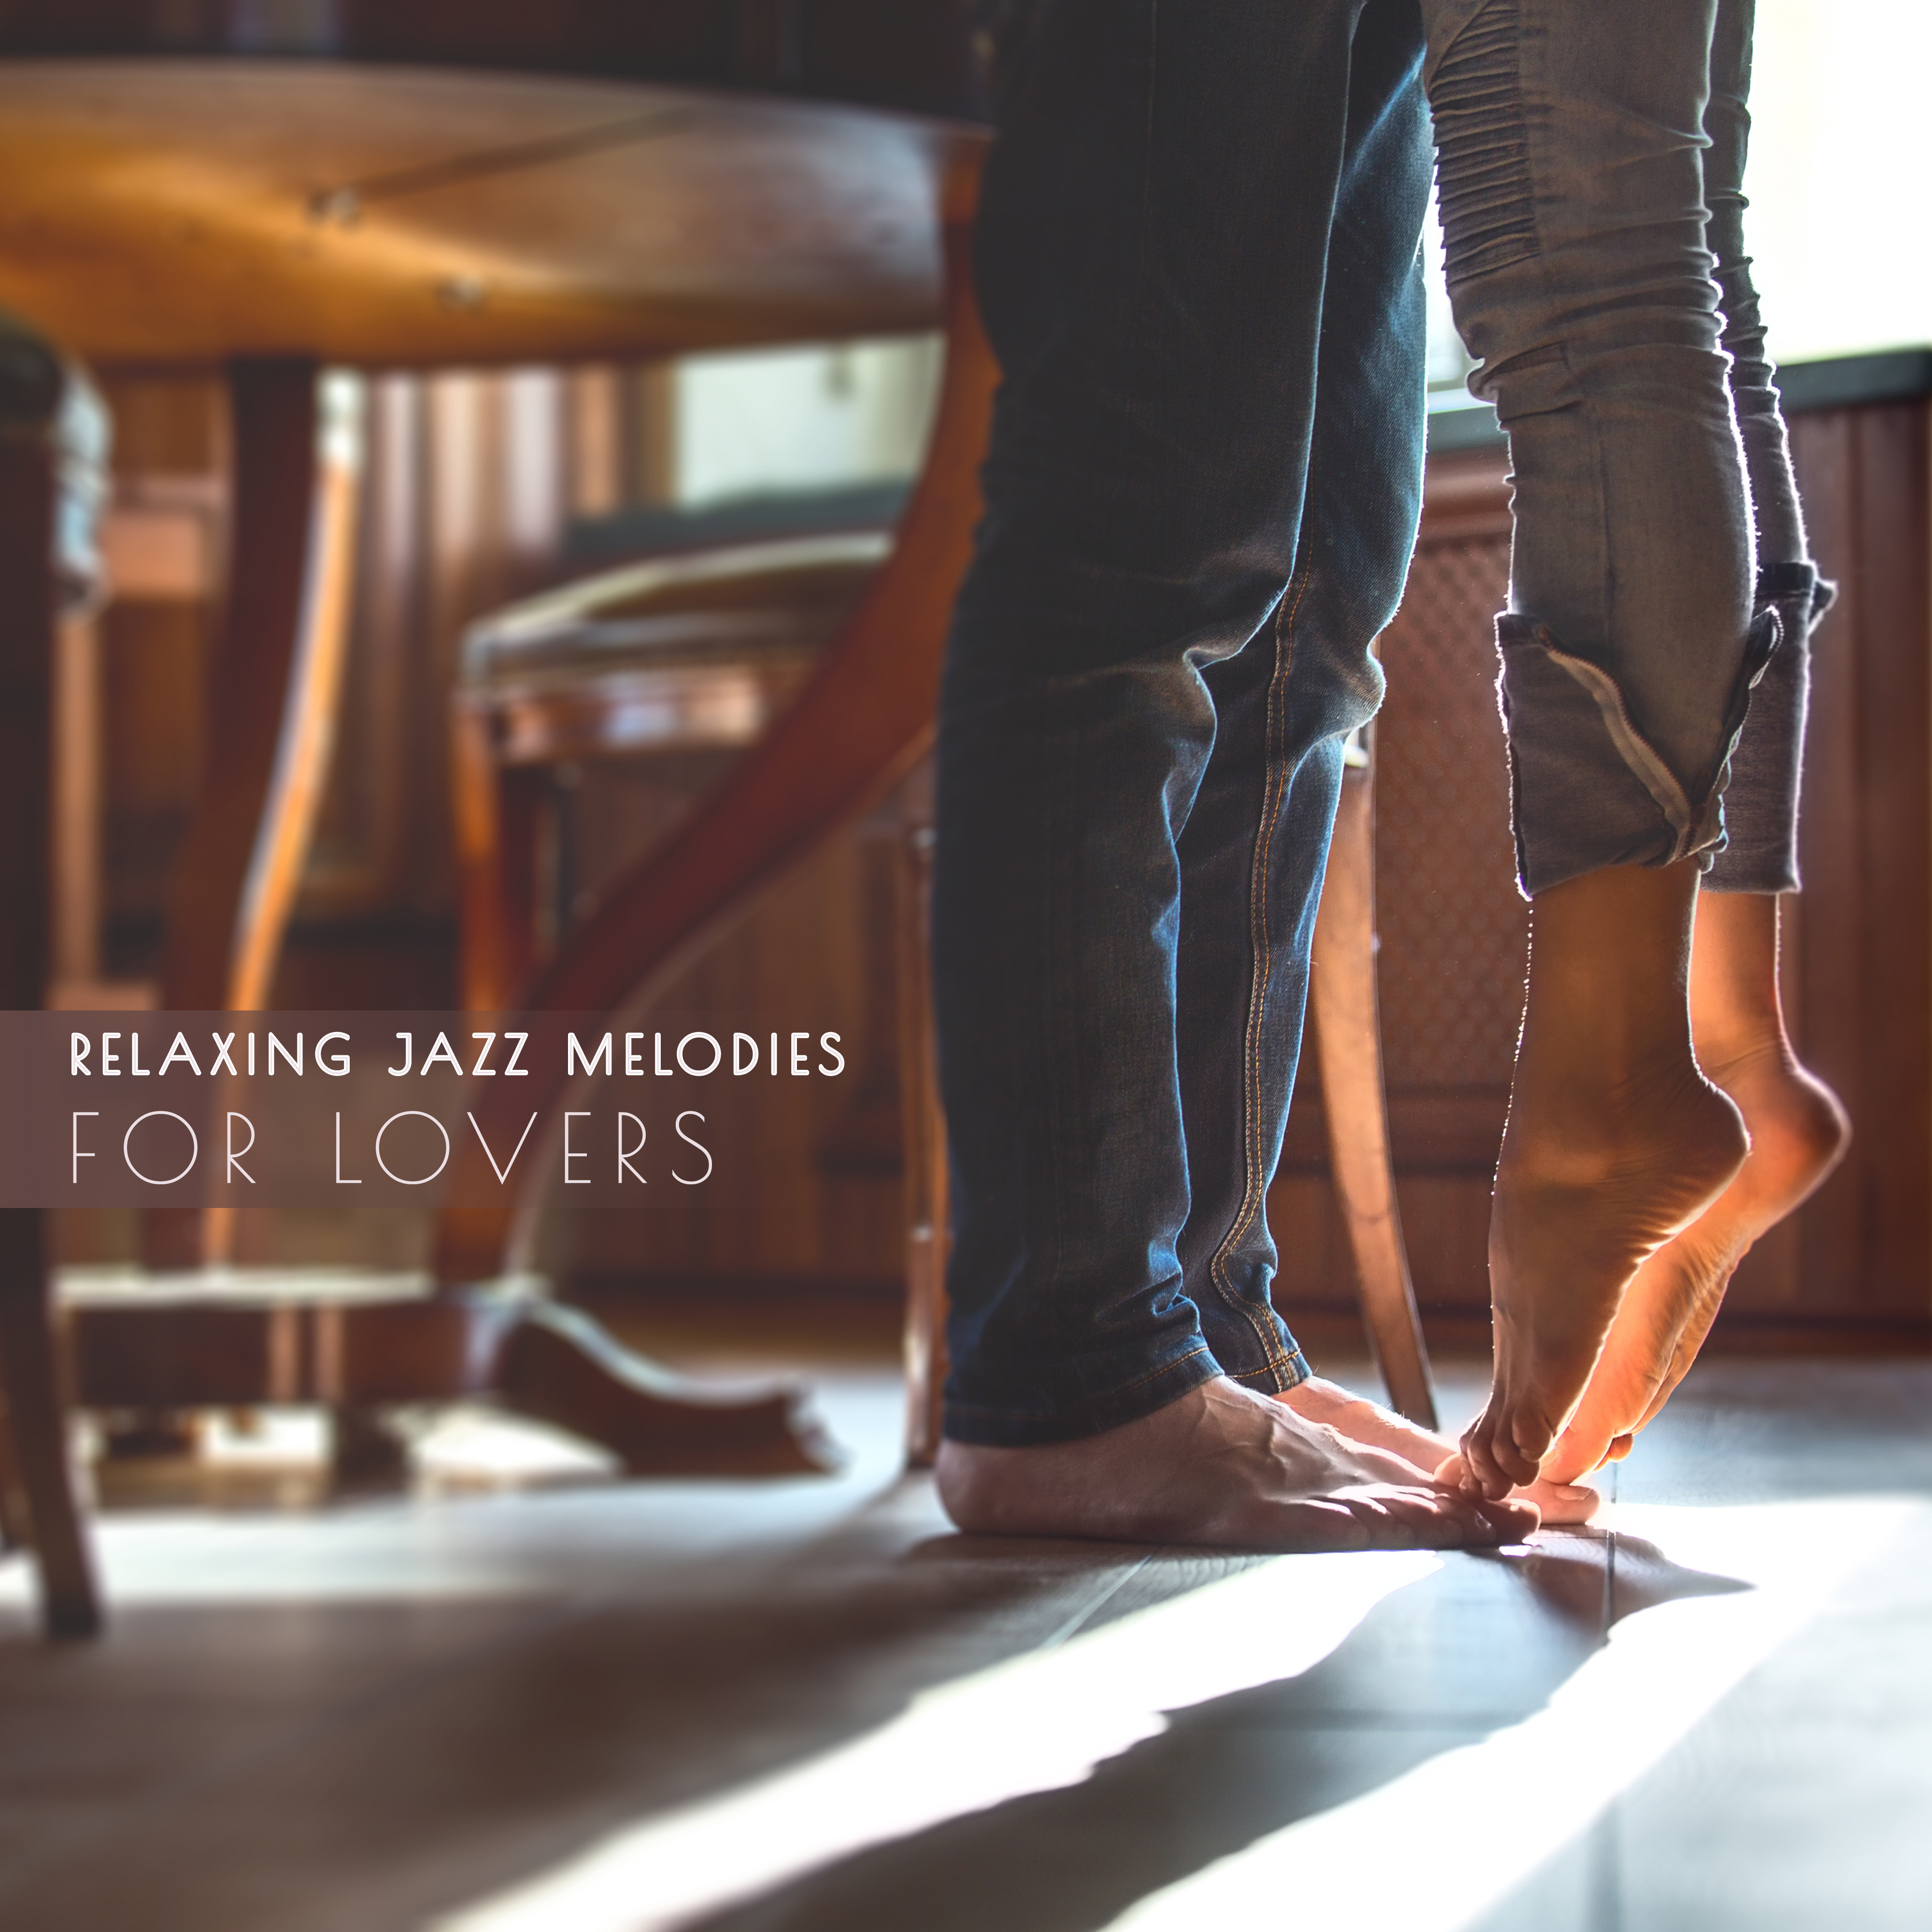 Relaxing Jazz Melodies for Lovers